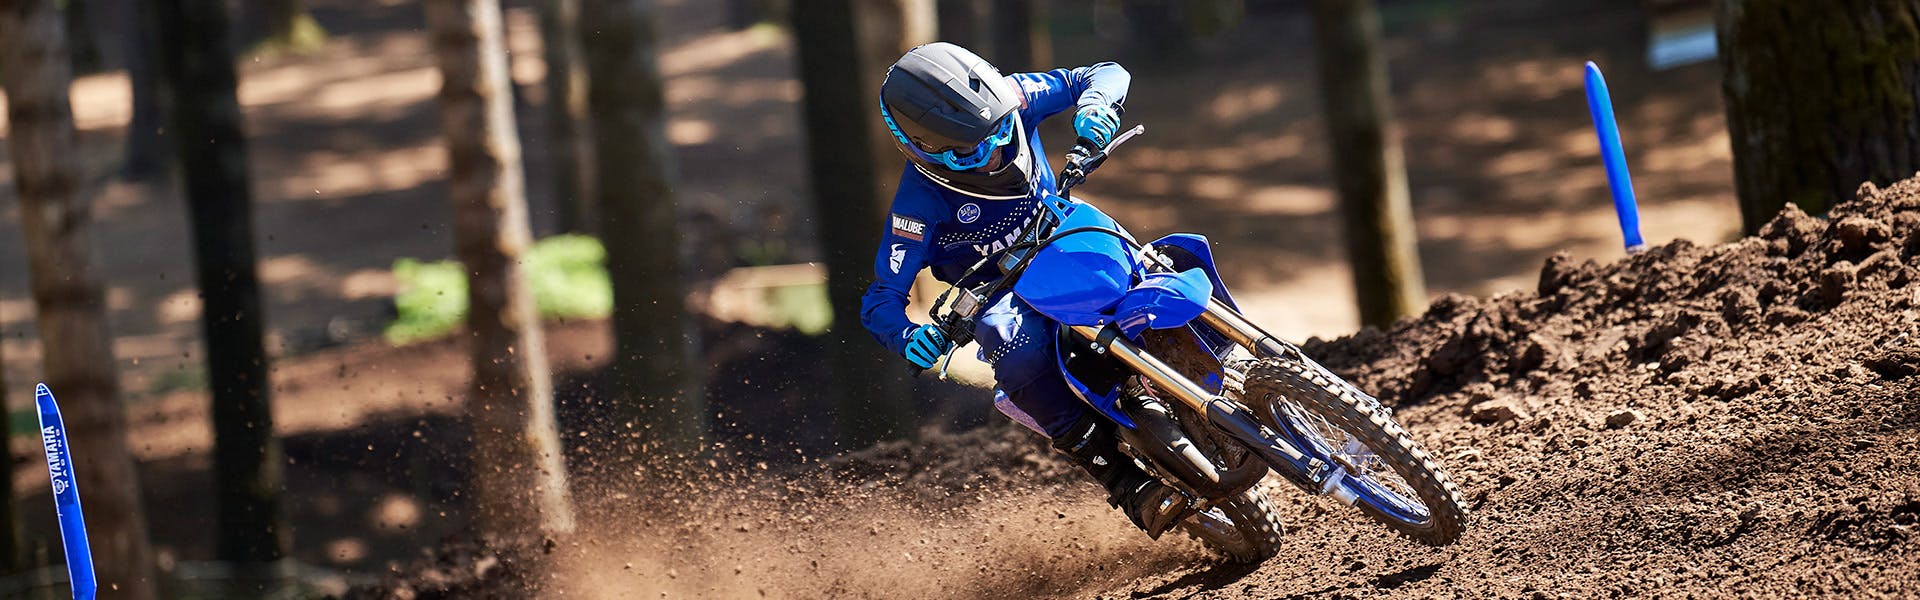 Yamaha YZ85 in team yamaha blue colour, being ridden off-track